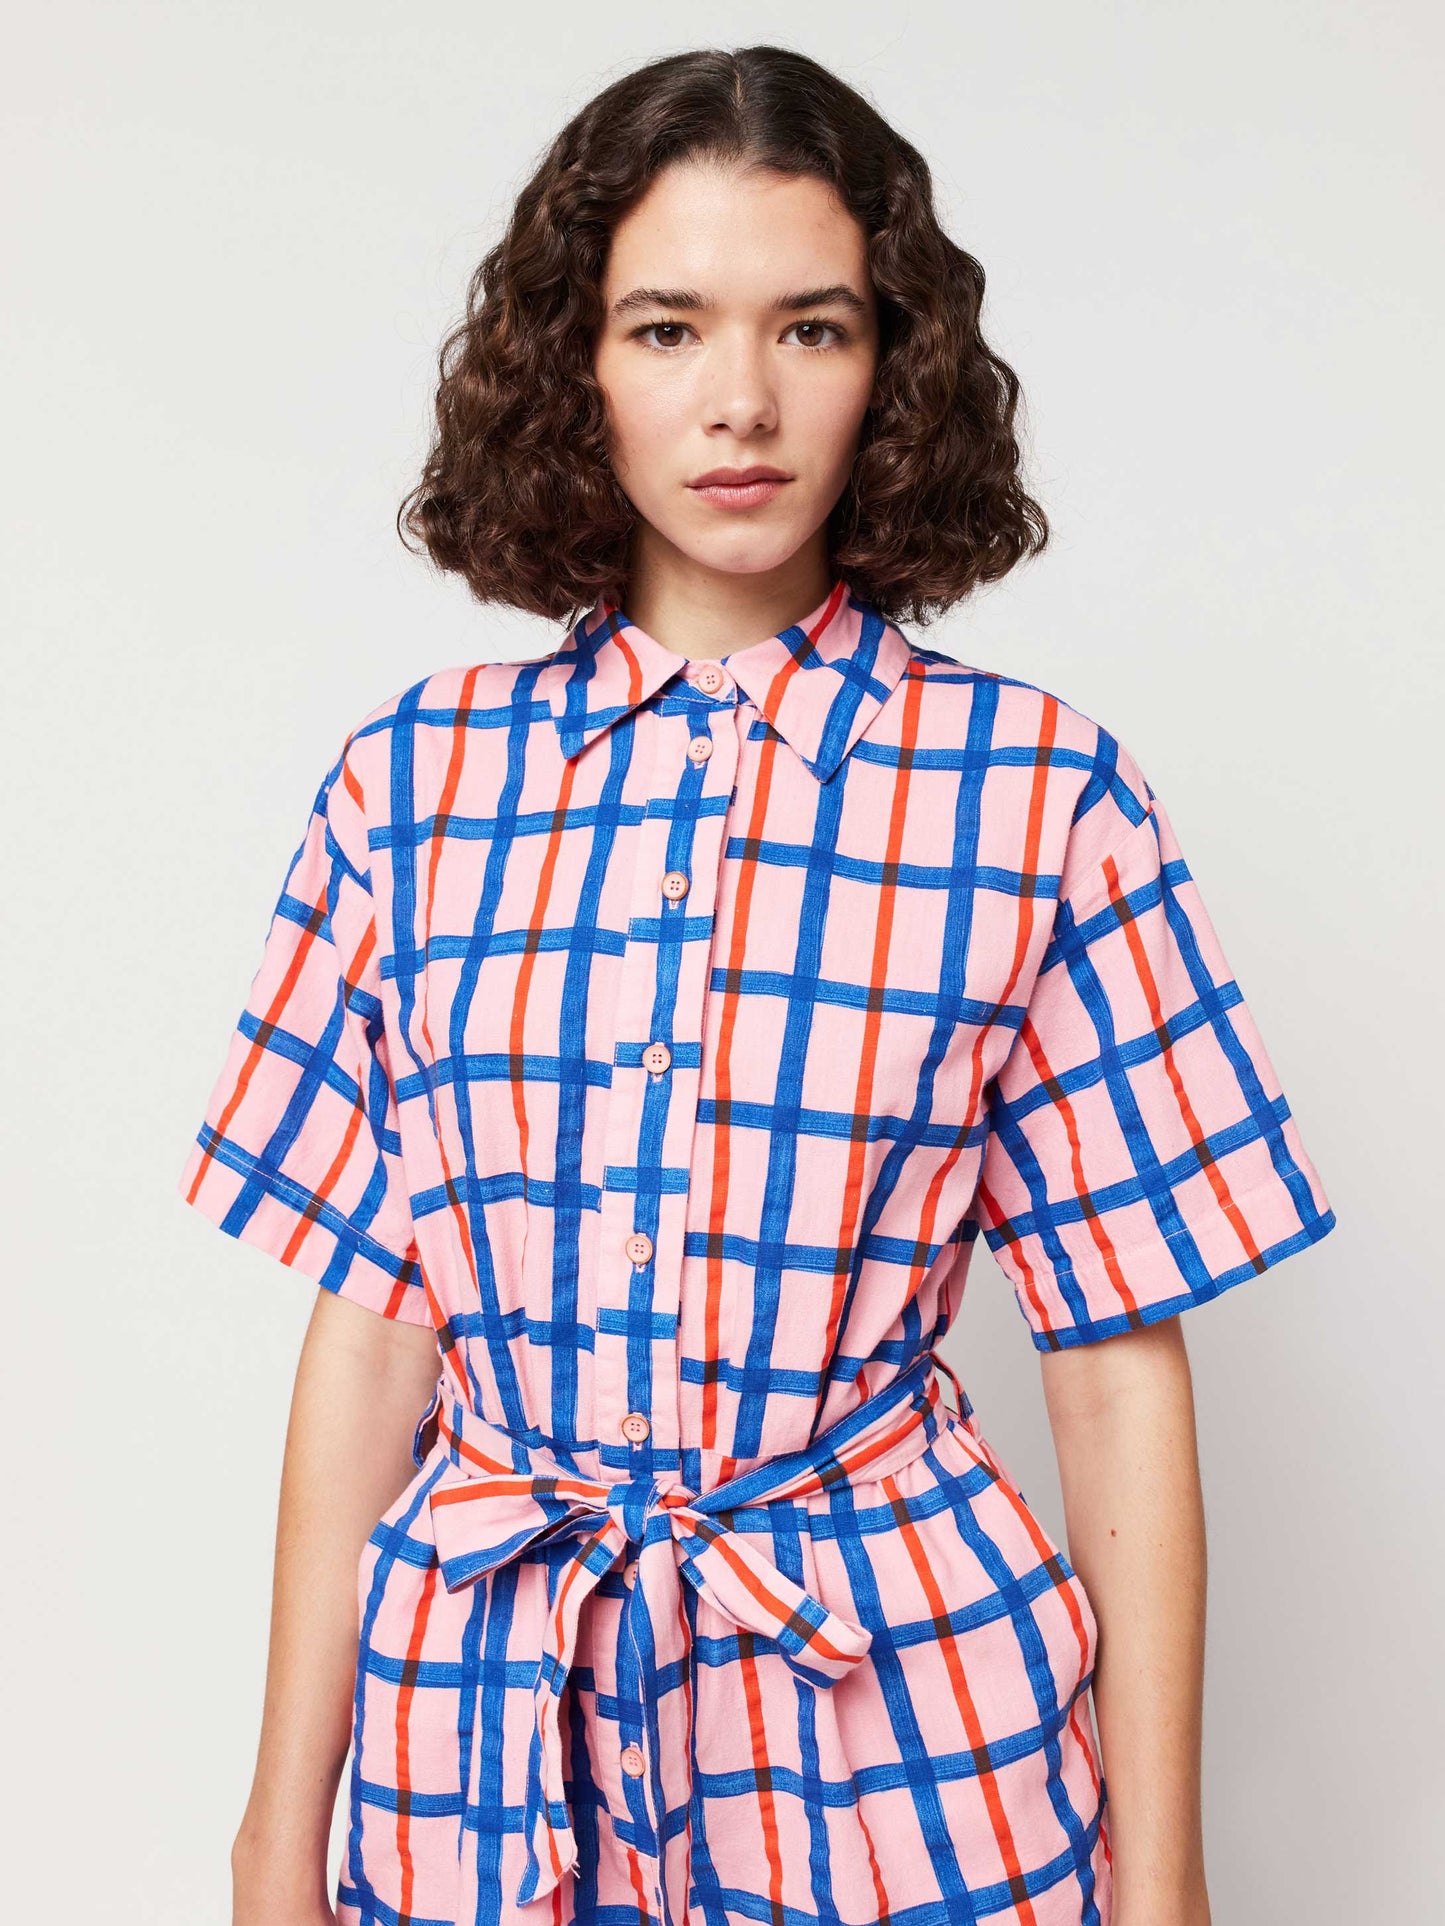 Checked short playsuit